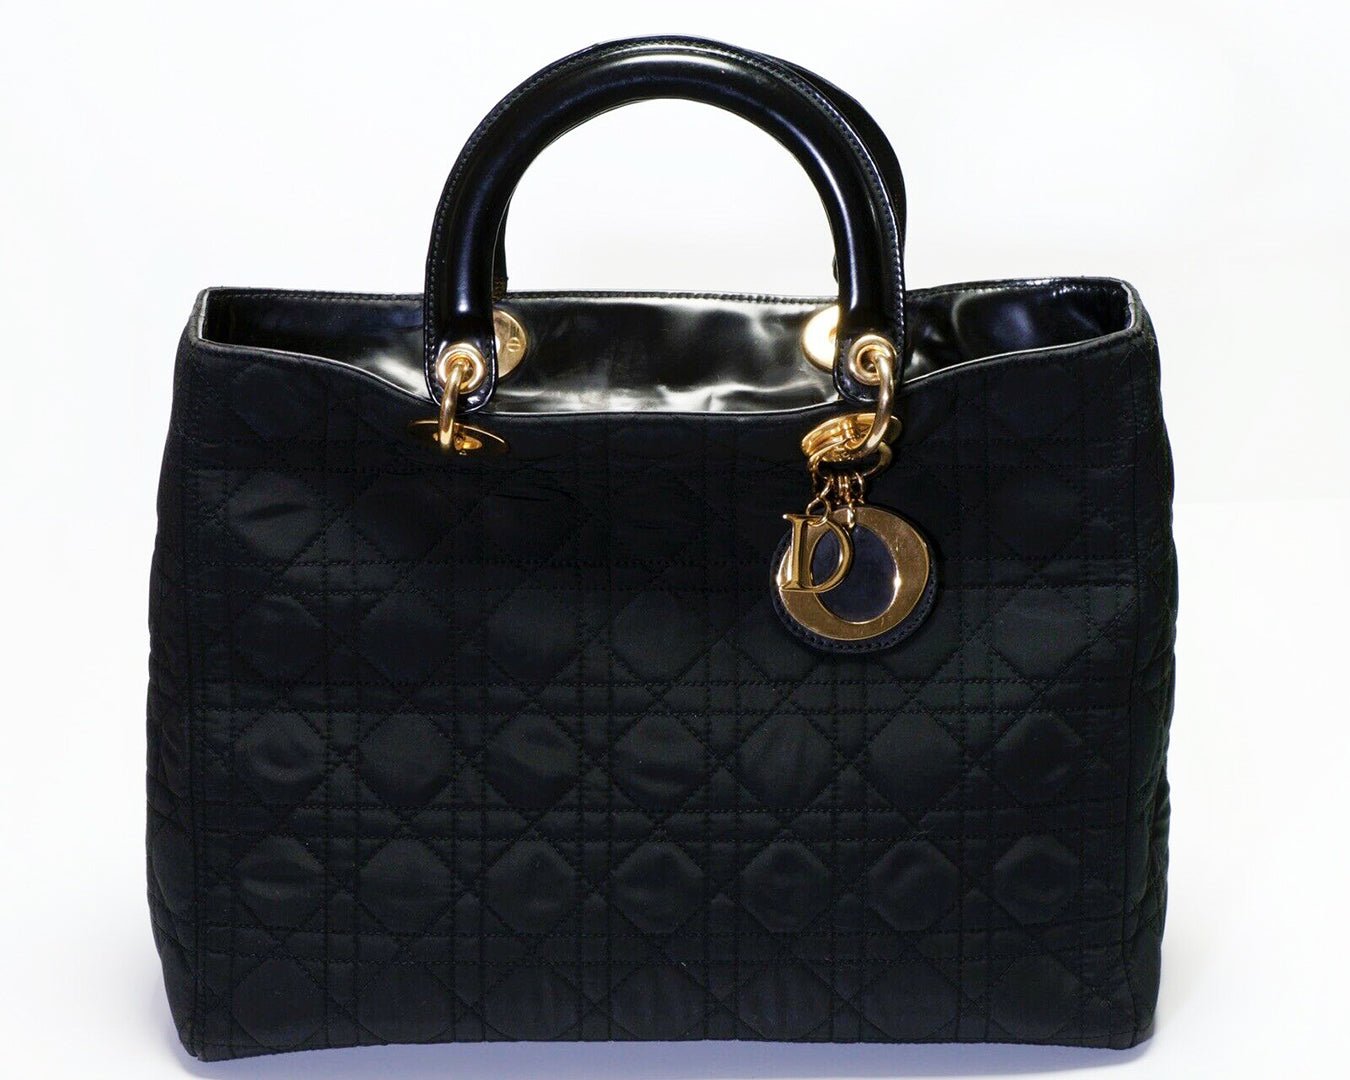 Vintage Christian Dior Lady Dior Black Nylon Leather Quilted Women’s Bag